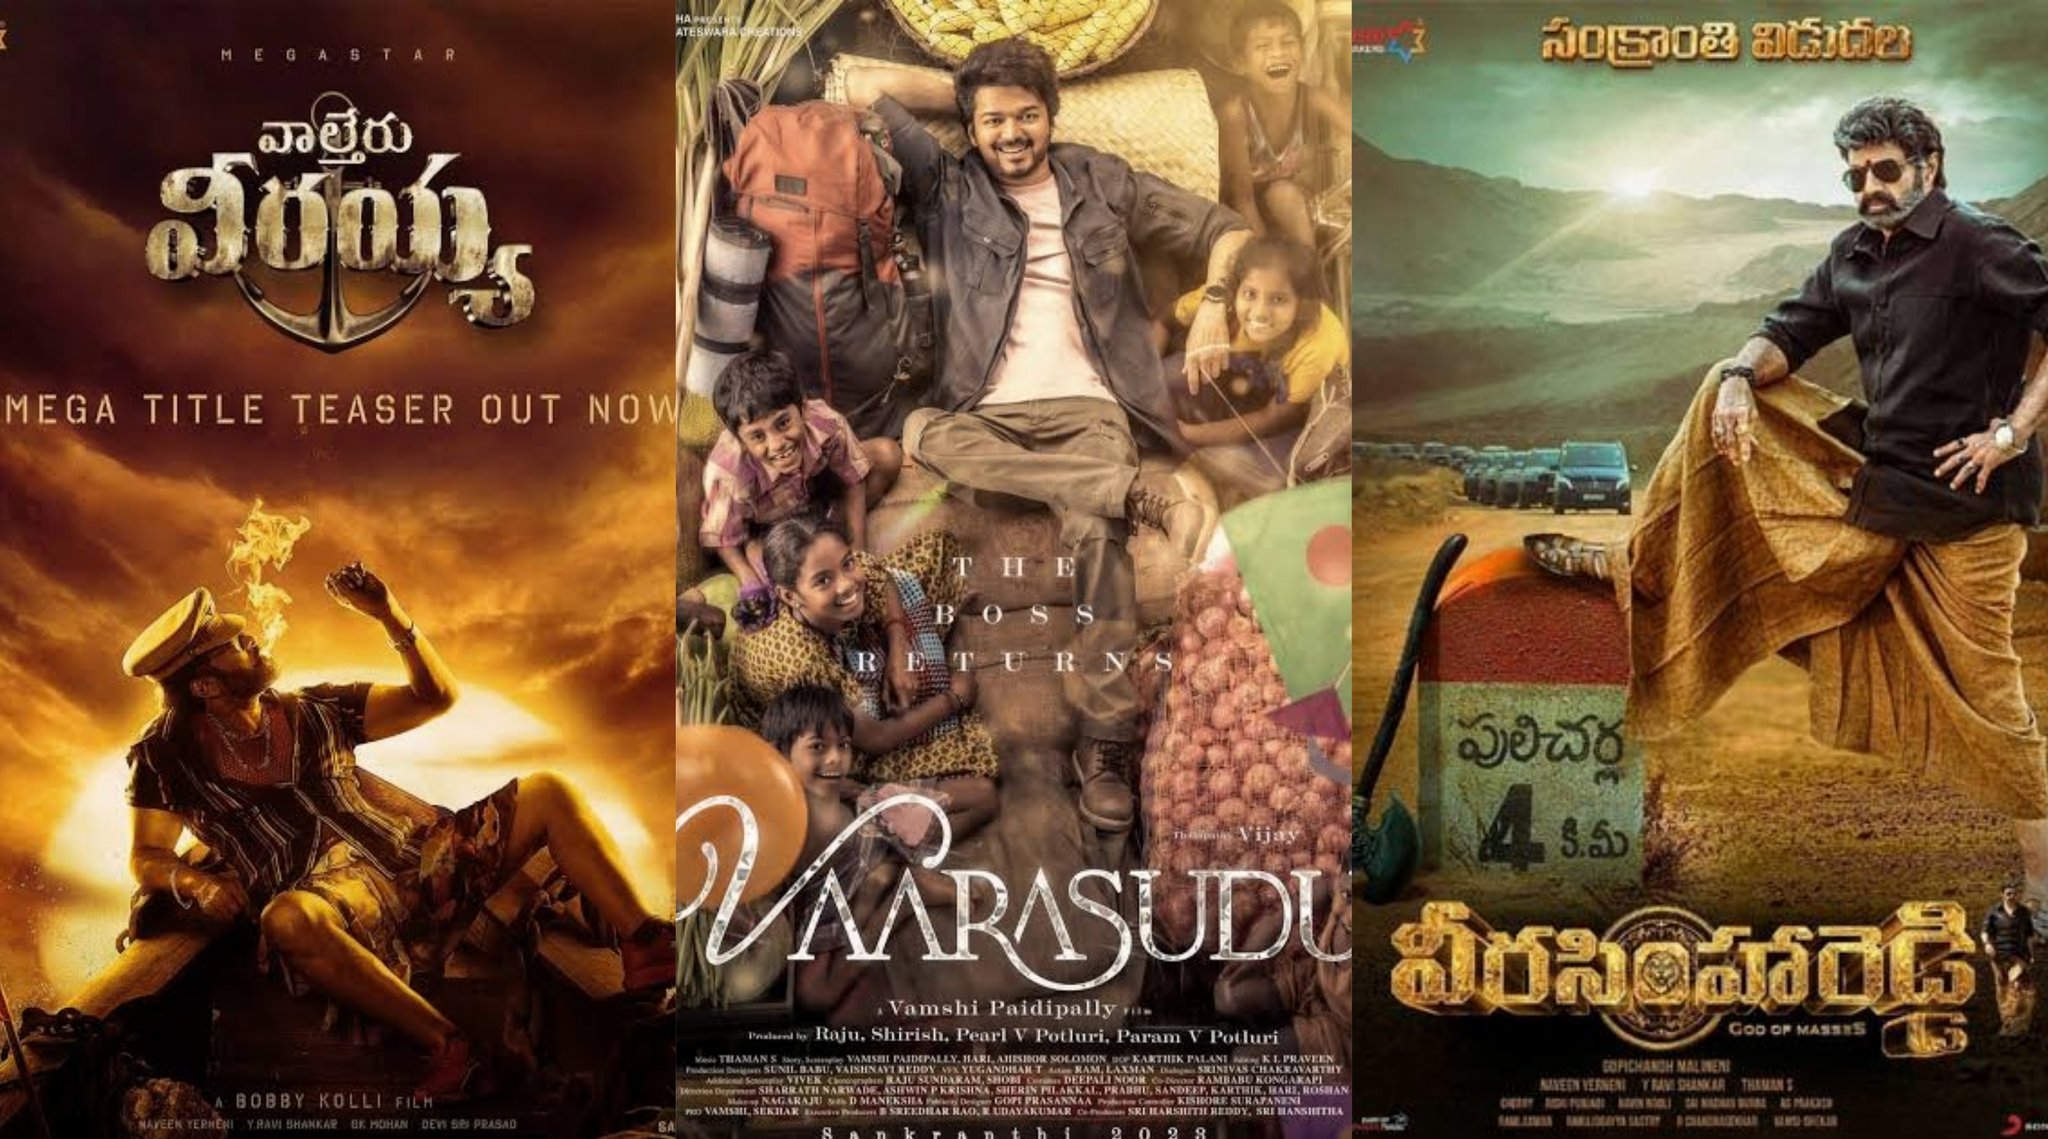 Box Office - USA business details of Sankranthi releases